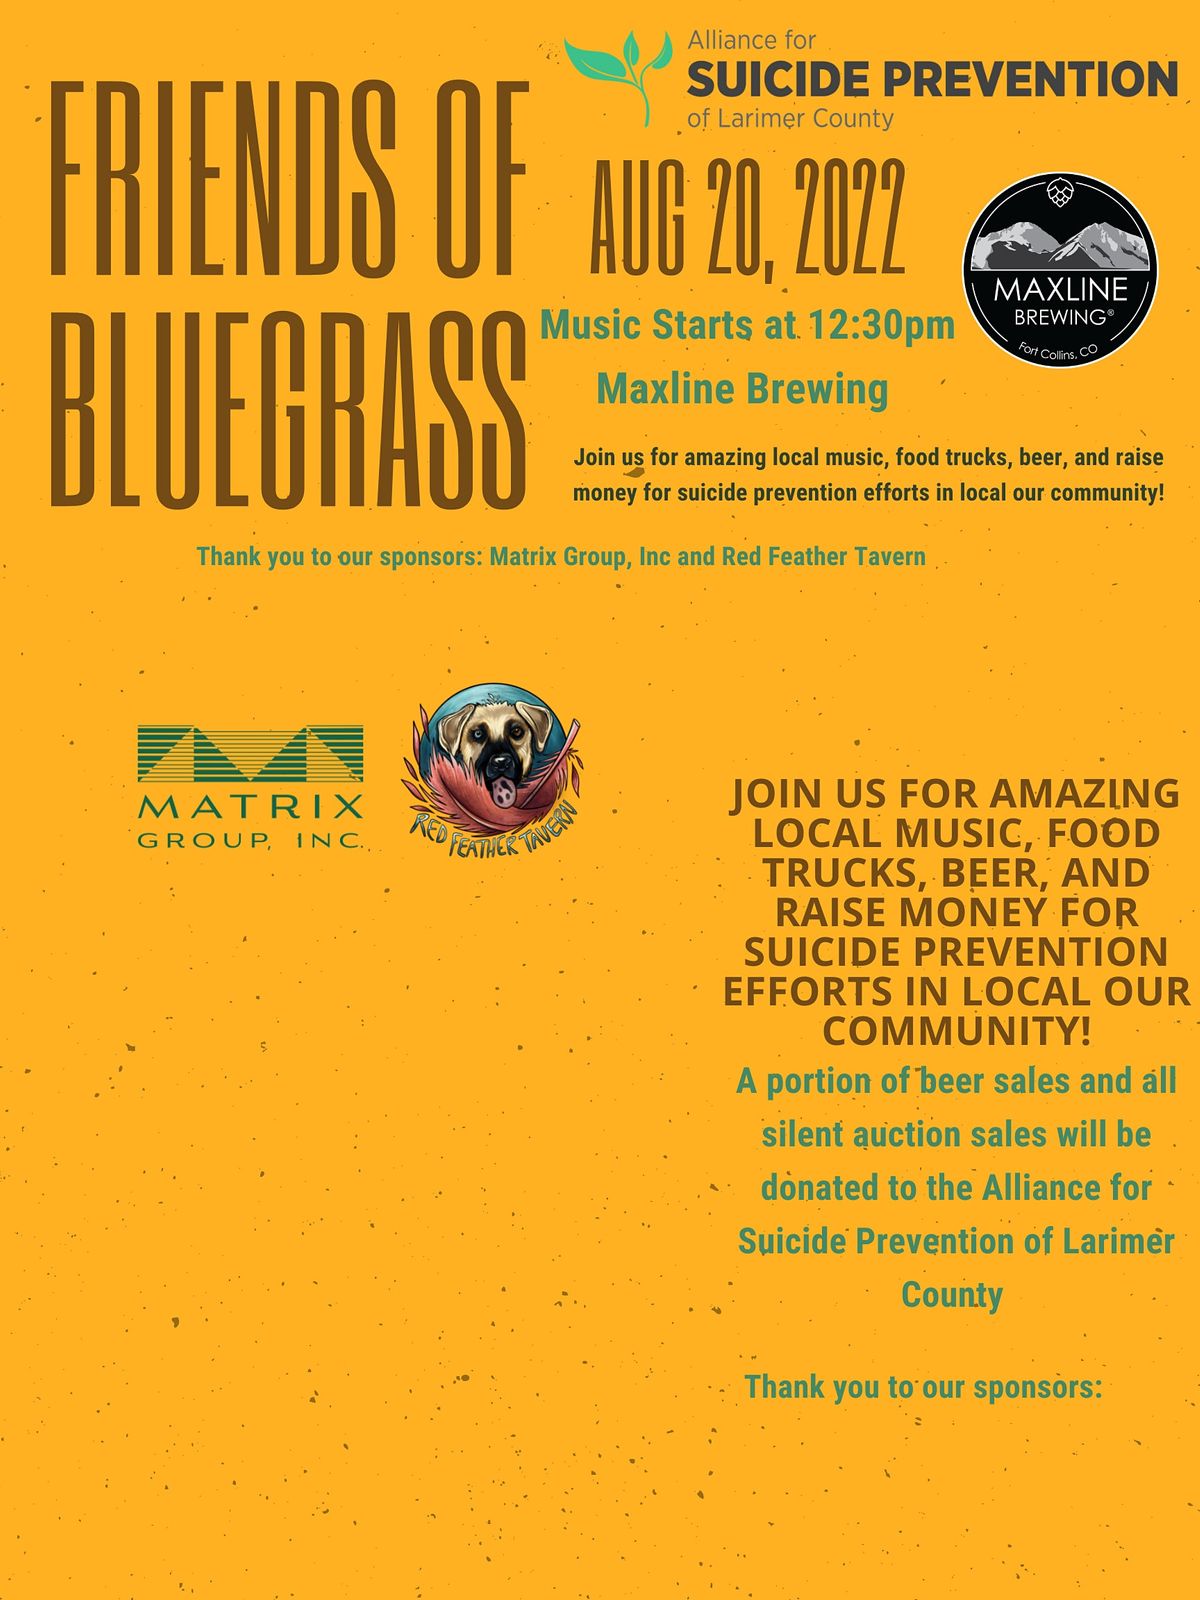 Friends of Bluegrass- Music Festival for Suicide Prevention